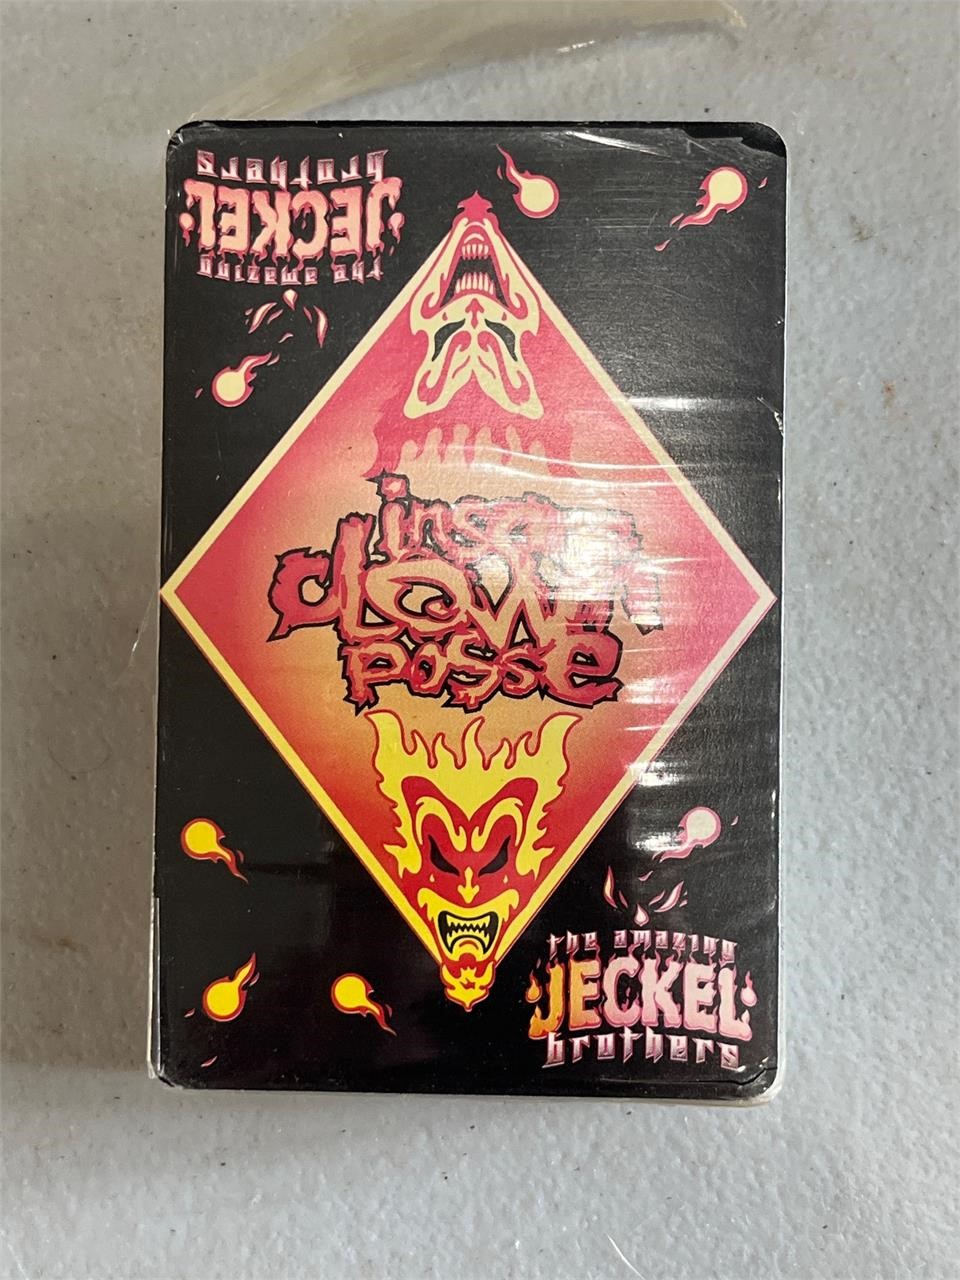 New insane clown posse playing cards